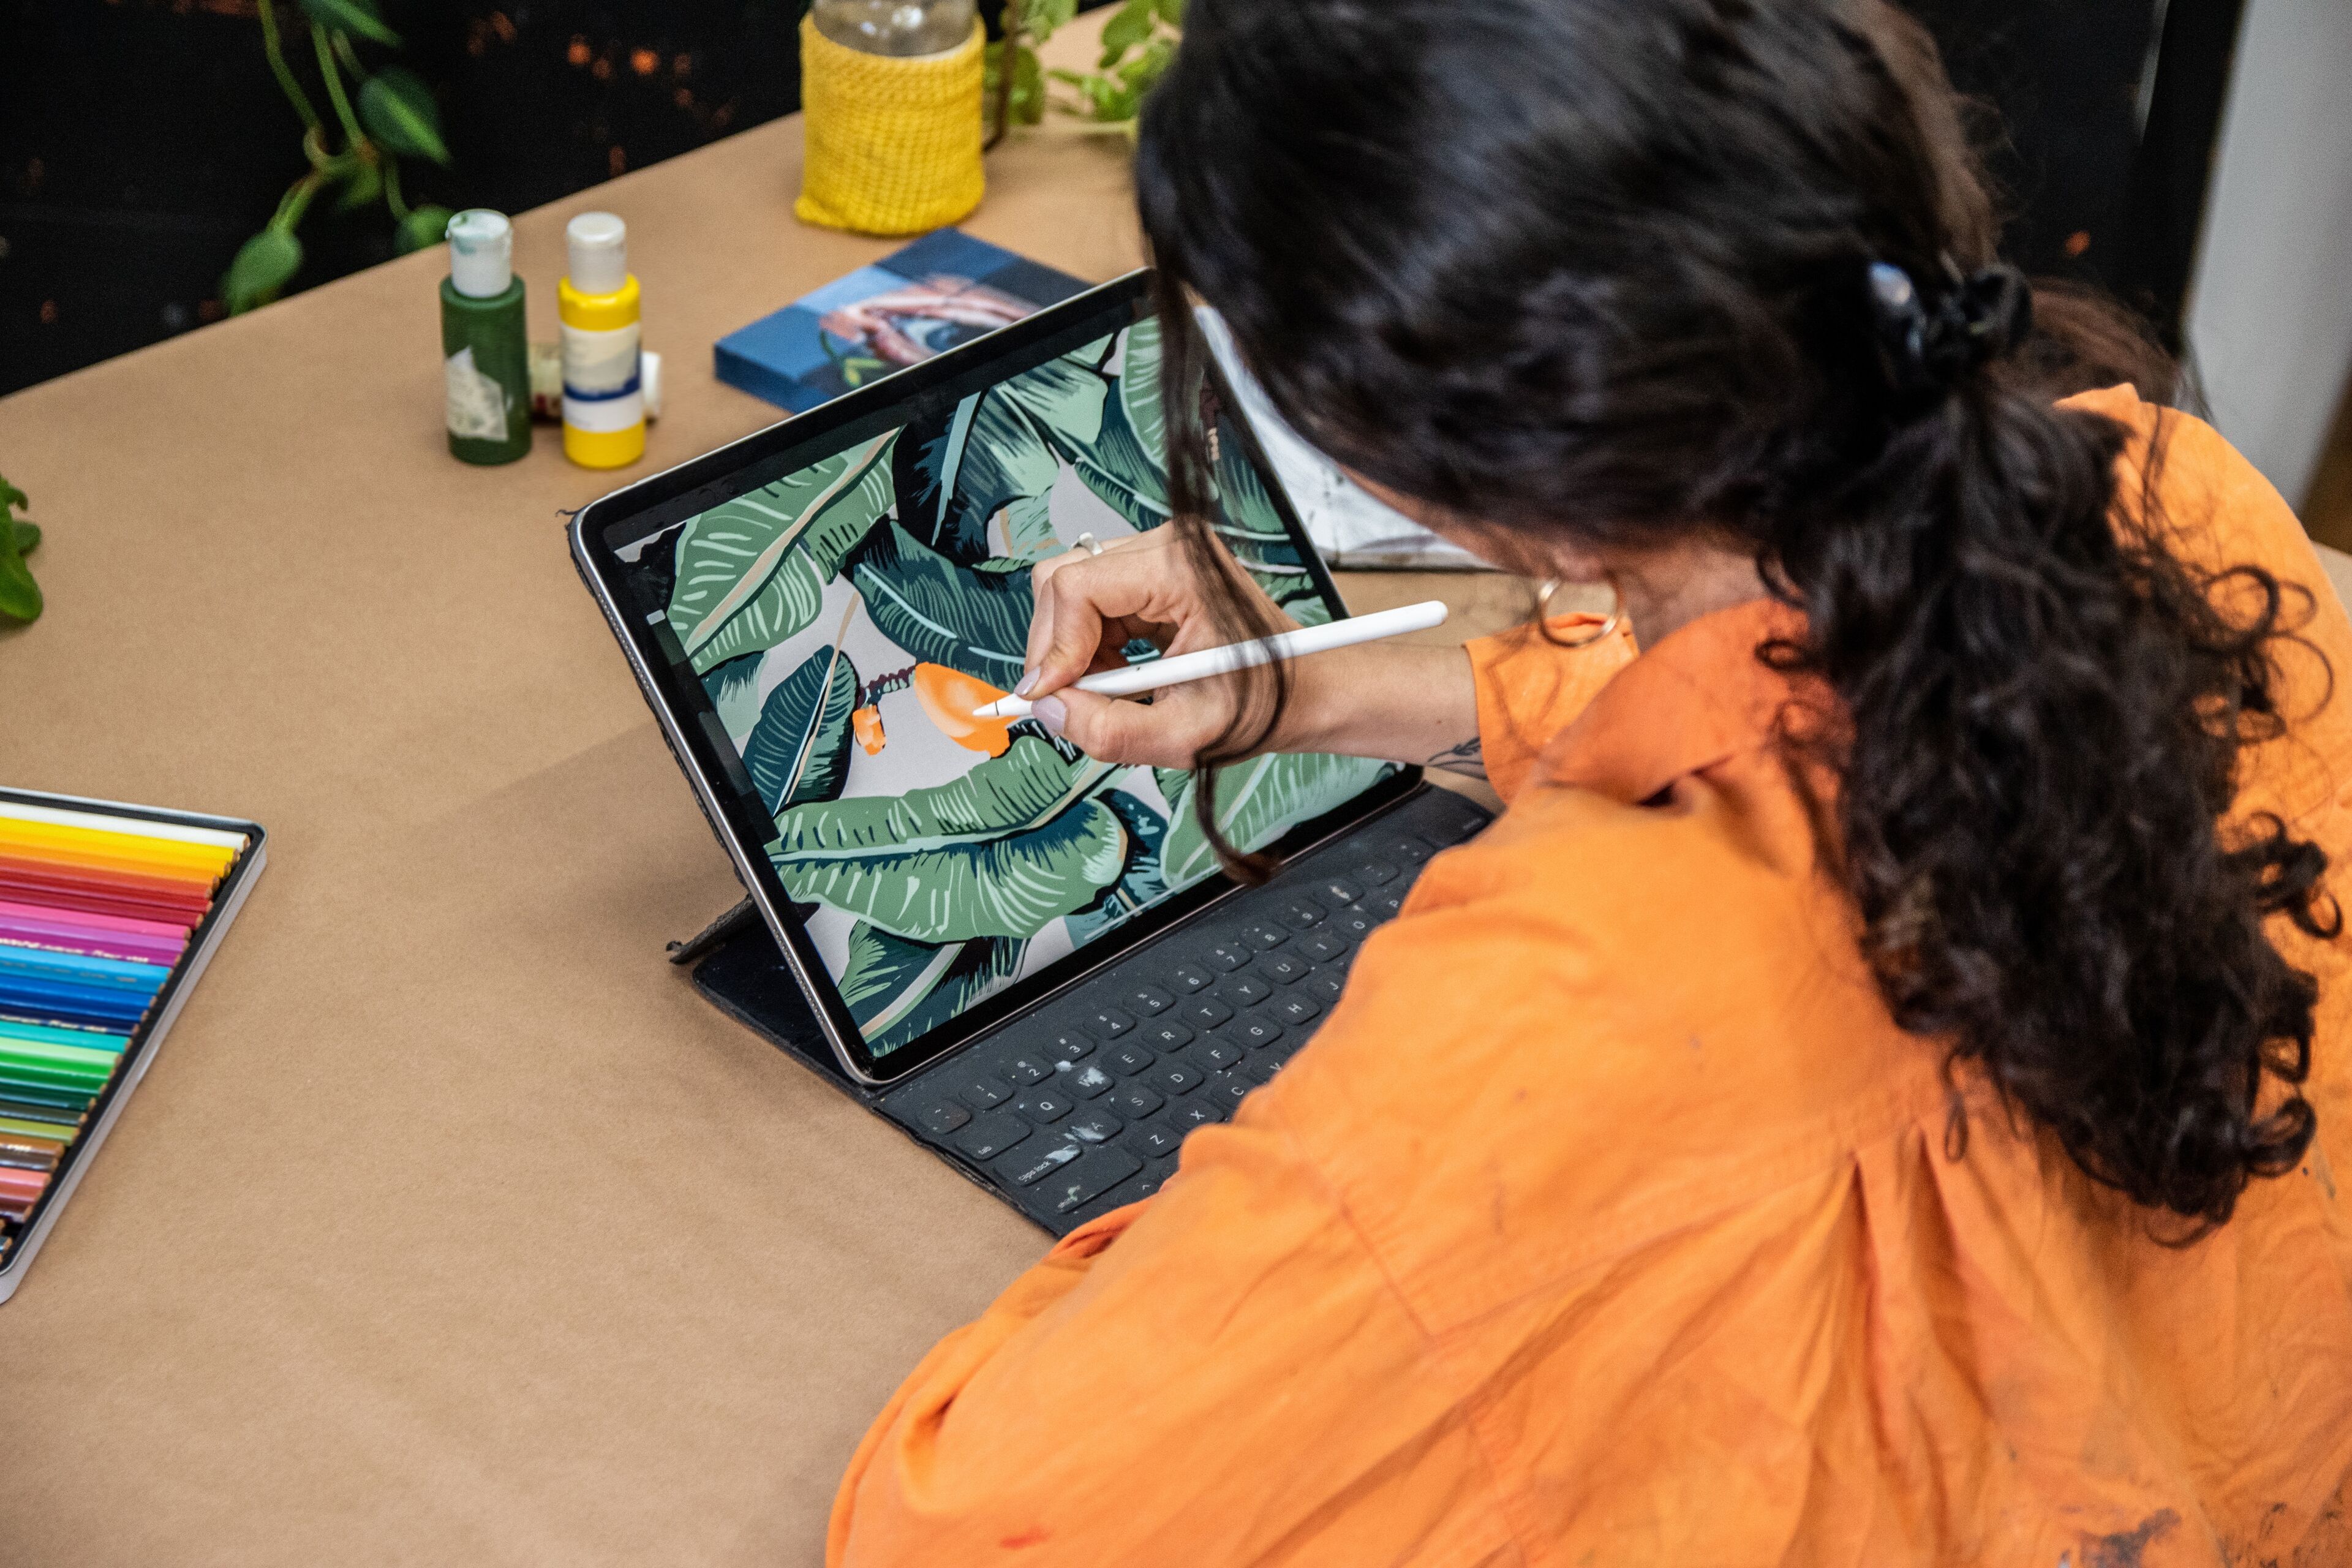 An artist in an orange shirt uses a stylus on a tablet to digitally paint a tropical leaf design.